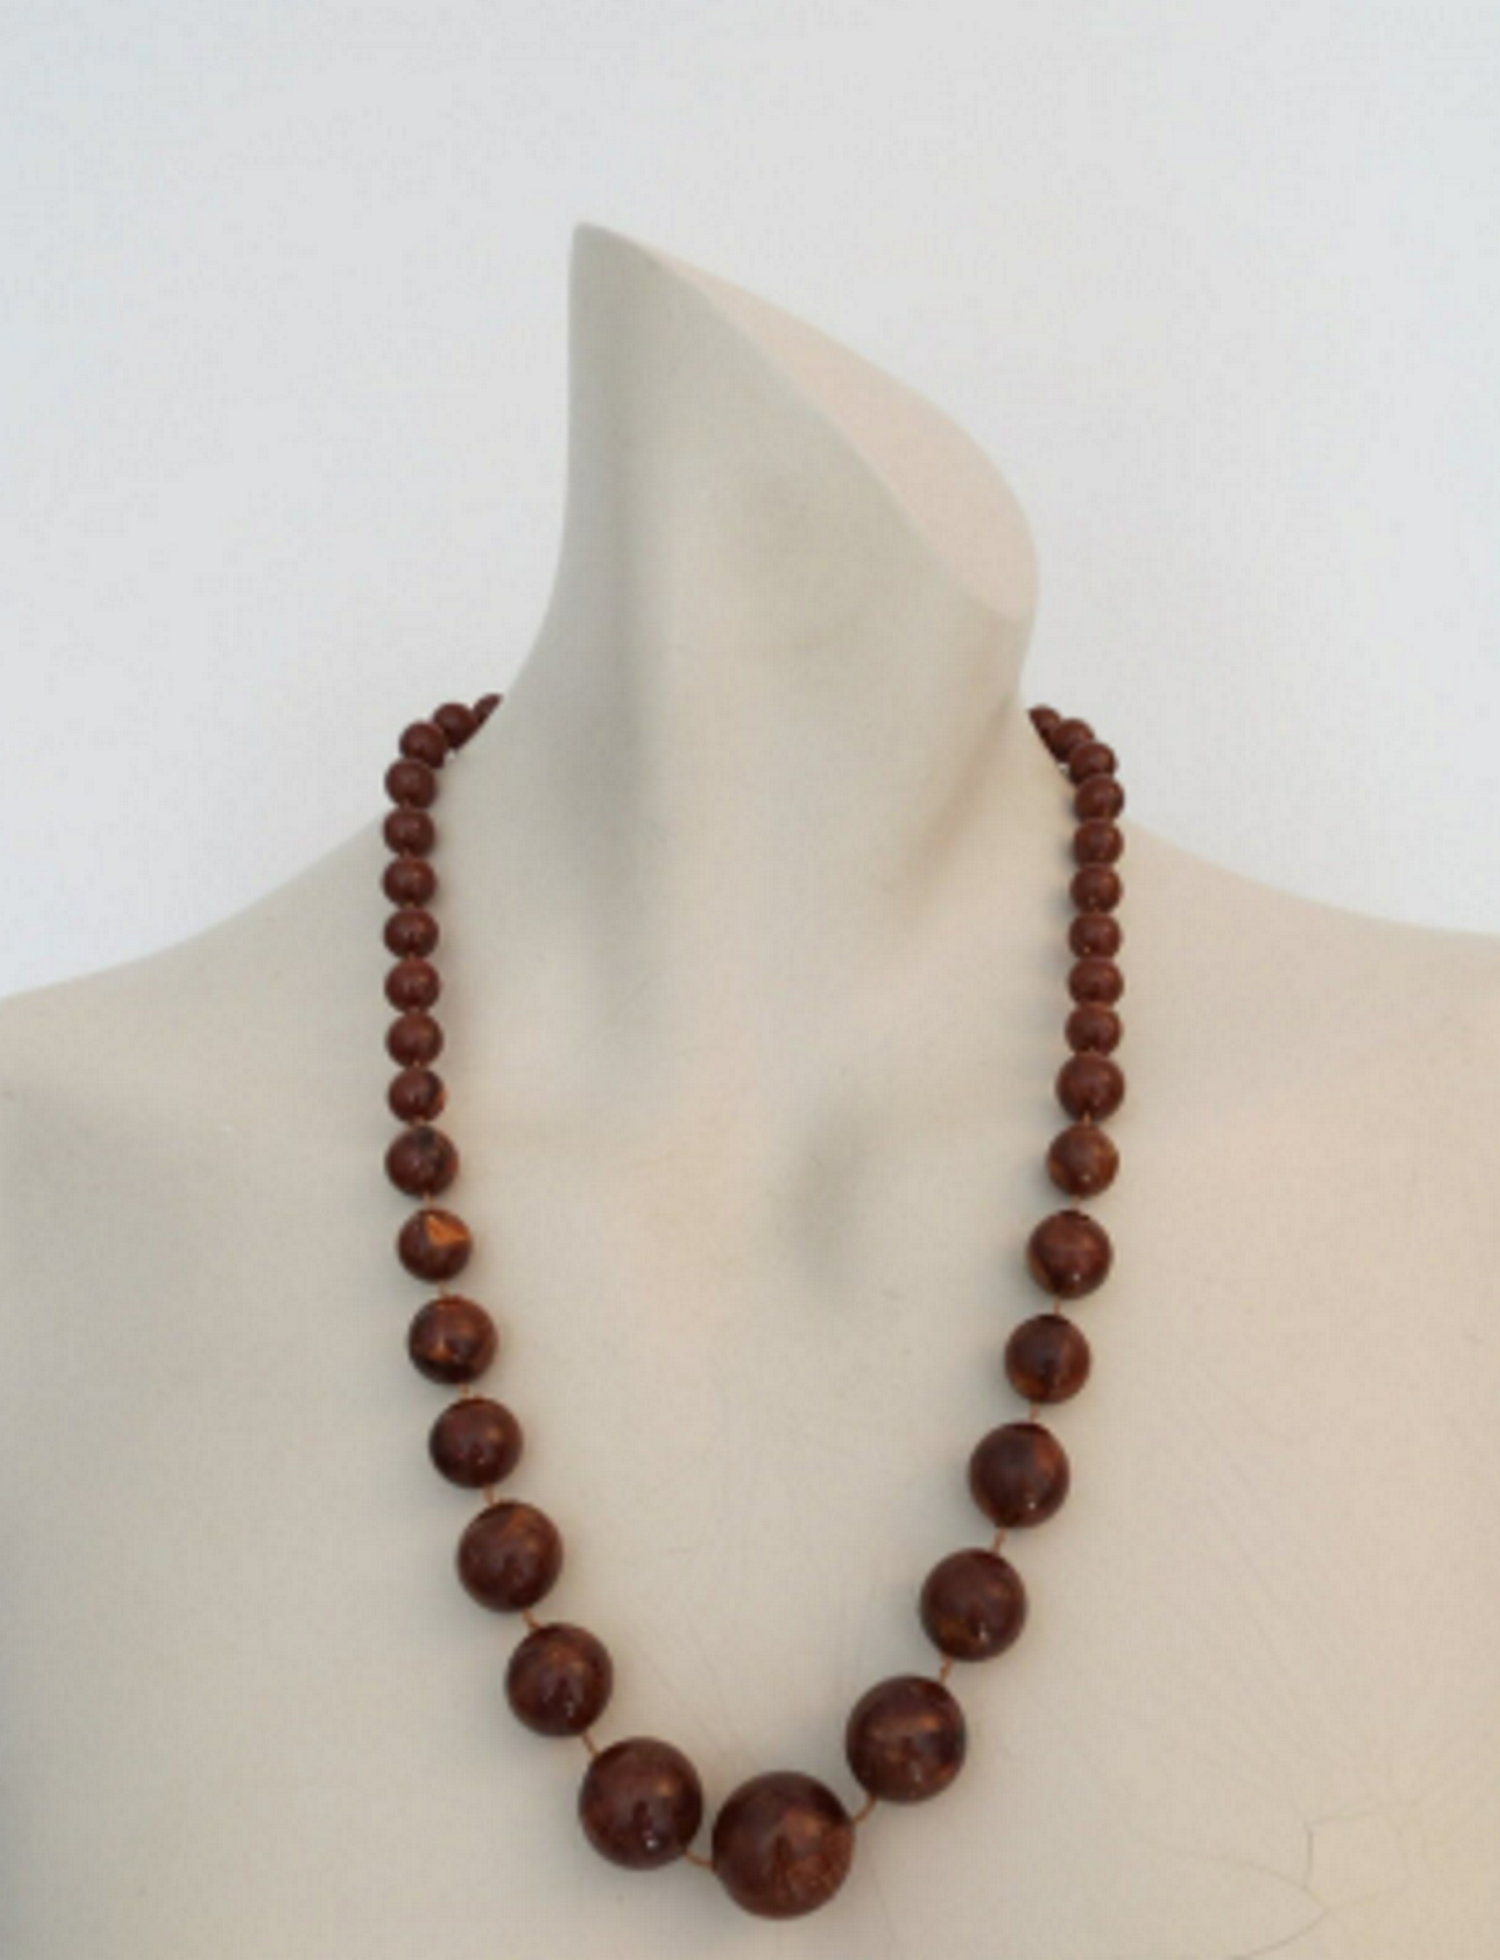 1960s vintage necklace of brown marbled beads